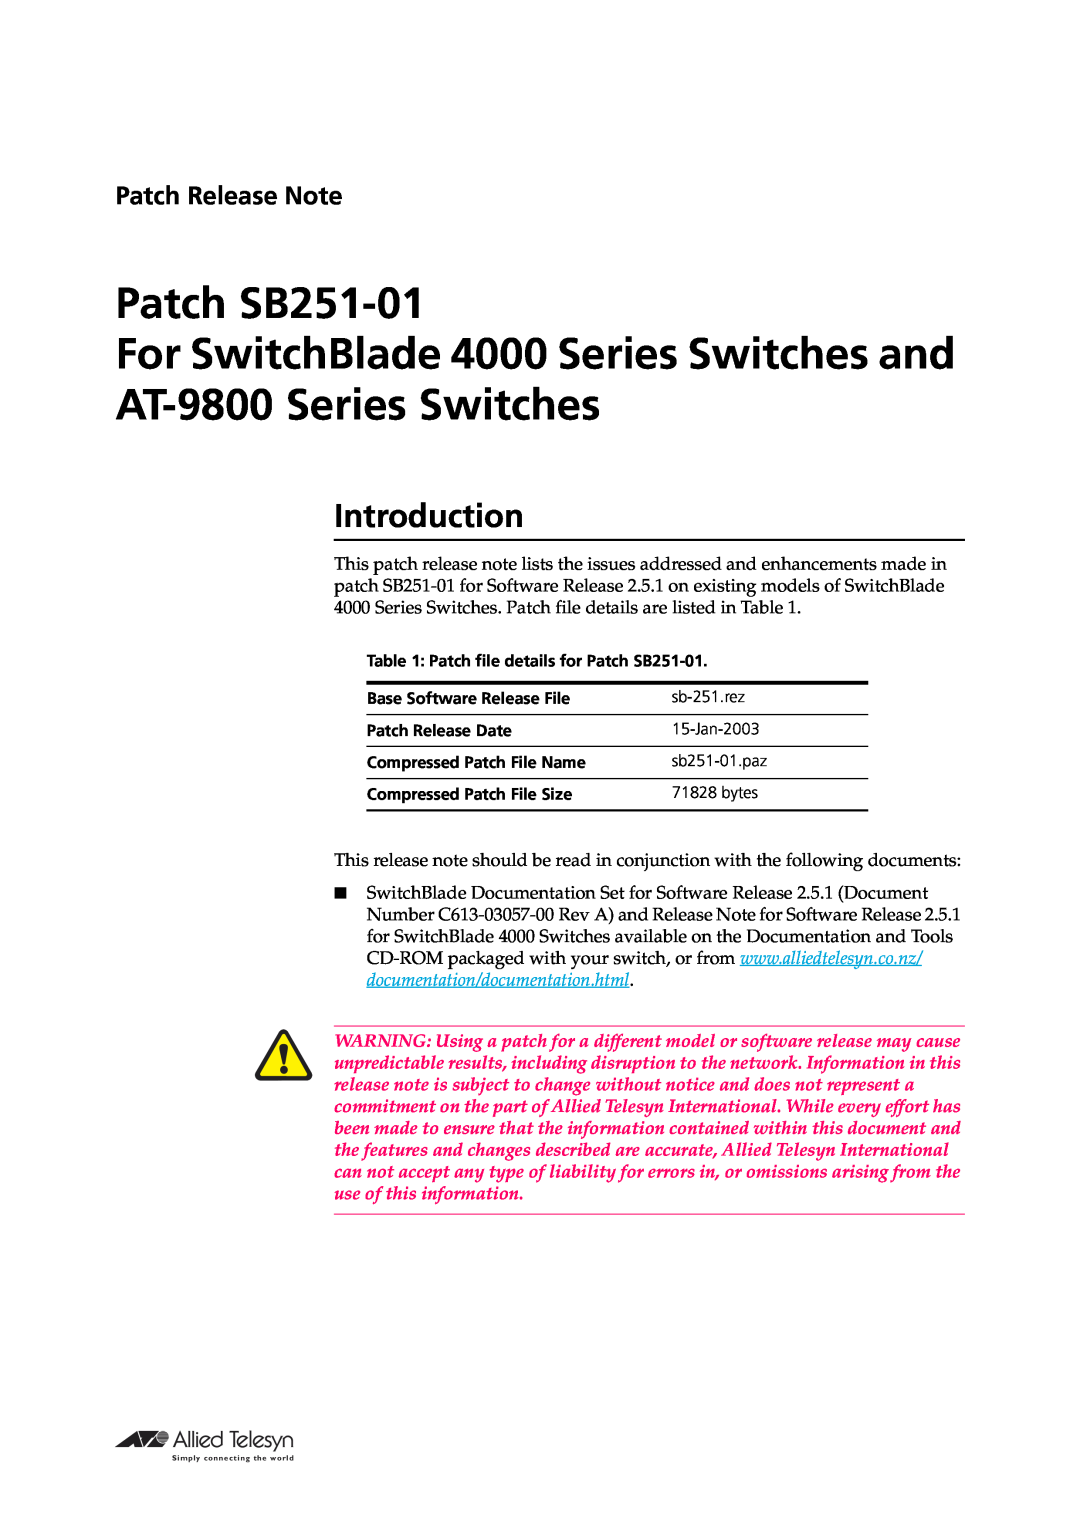 Allied Telesis manual Introduction, Patch SB251-01 For SwitchBlade 4000 Series Switches and, AT-9800 Series Switches 